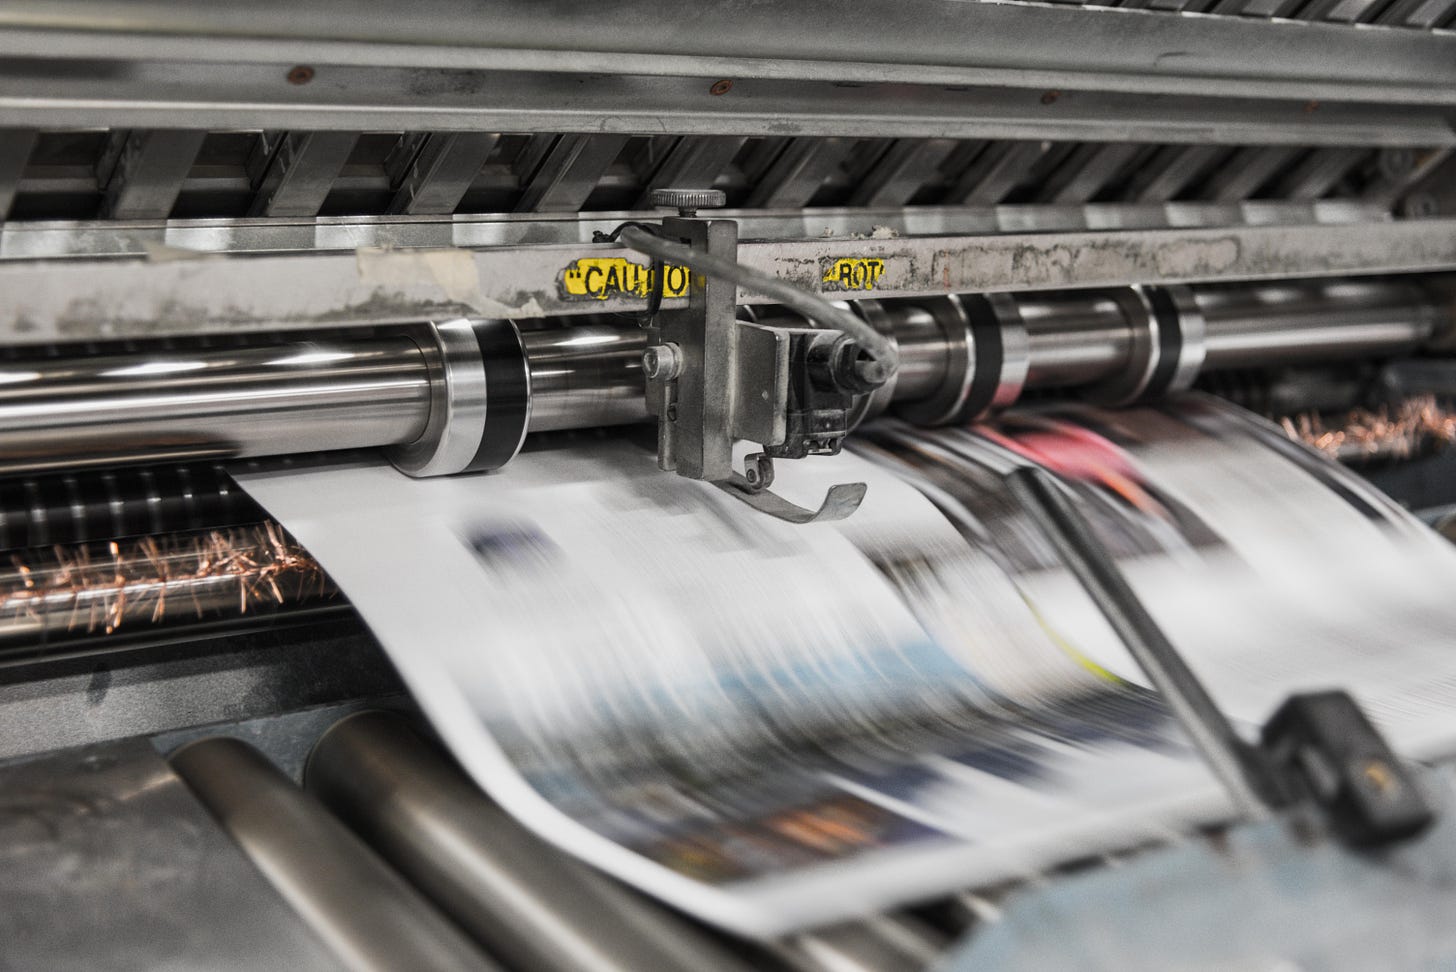 A printing press spitting out a newspaper. Photo from Unsplash.